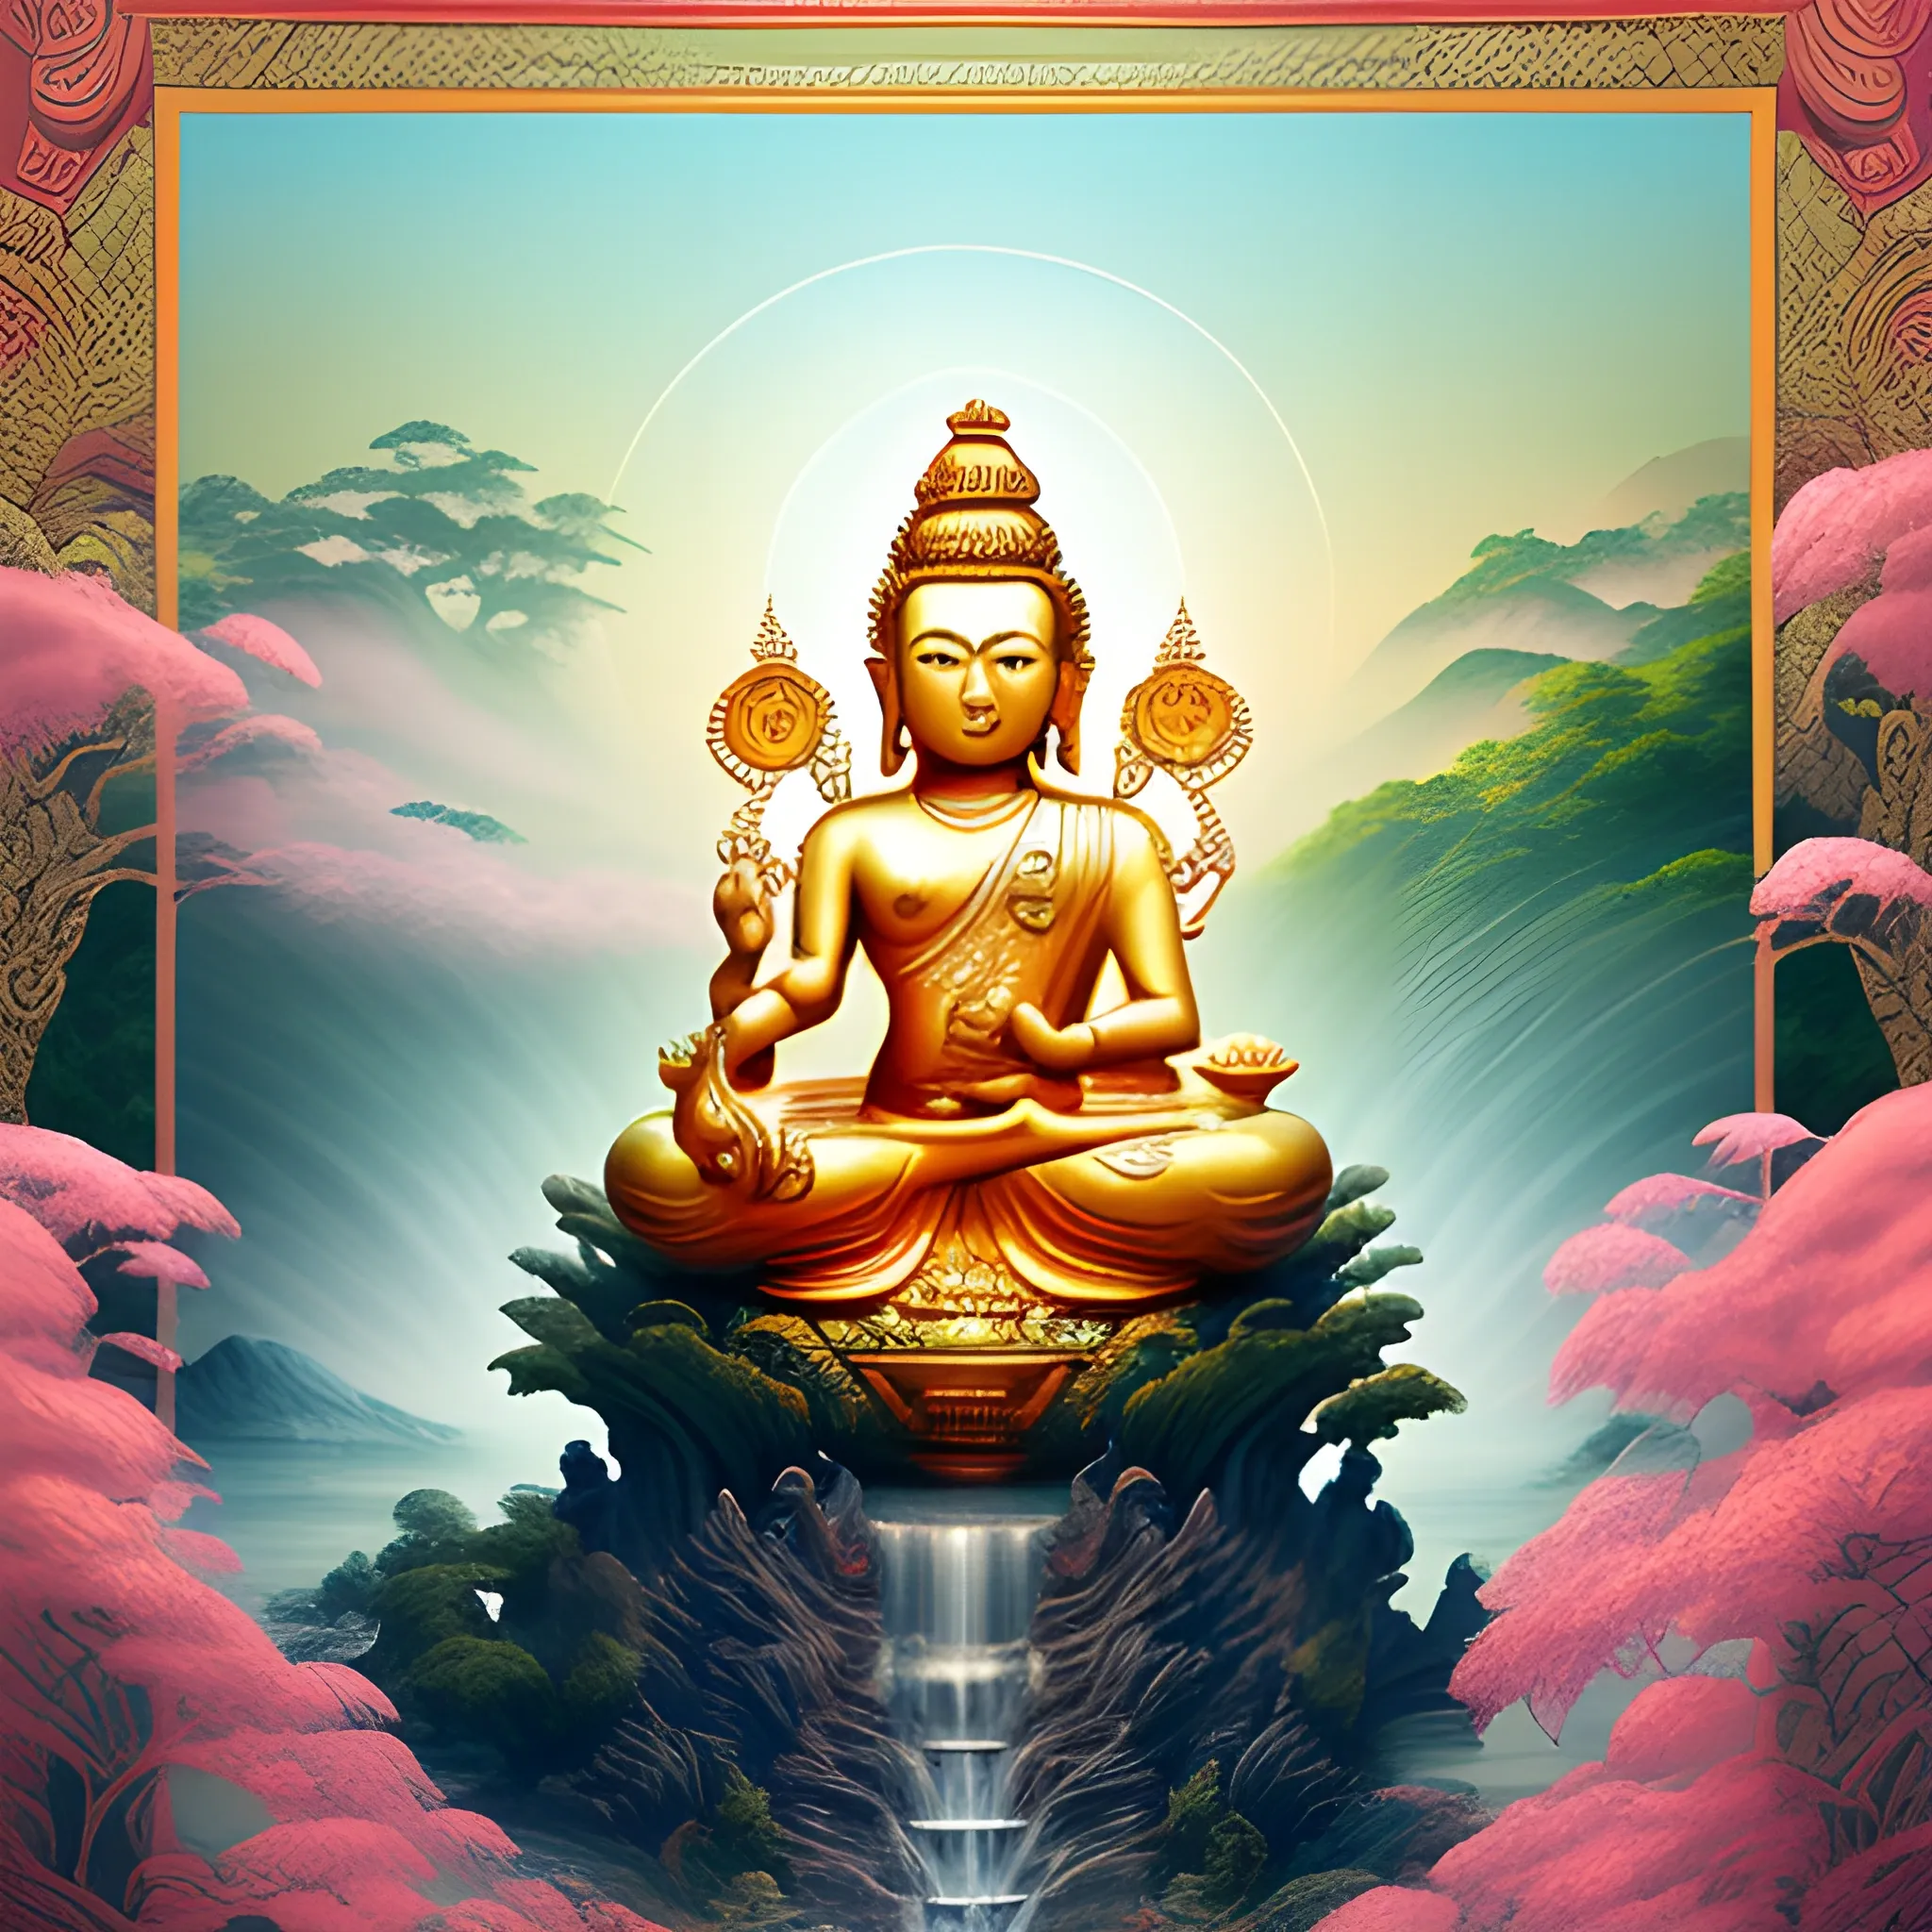 (by Ananta Mandal (and Andrew Biraj:0.5)), (in the style of nihonga), Style: Abstract, Medium: Digital illustration, Subject: A Guanyin Pusa(Sanskrit Avalokiteśvara) in the middle of picture, An otherworldly landscape with floating islands, cascading waterfalls, and vibrant flora and fauna. Camera Angle: Overhead shot capturing the vastness and intricate details of the scene. The colors are saturated, and the lighting creates a warm and ethereal atmosphere. The painting is highly detailed, with every brushstroke capturing the complexity of the imaginary world., (high quality), (detailed), (masterpiece), (best quality), (highres), (extremely detailed), (8k)